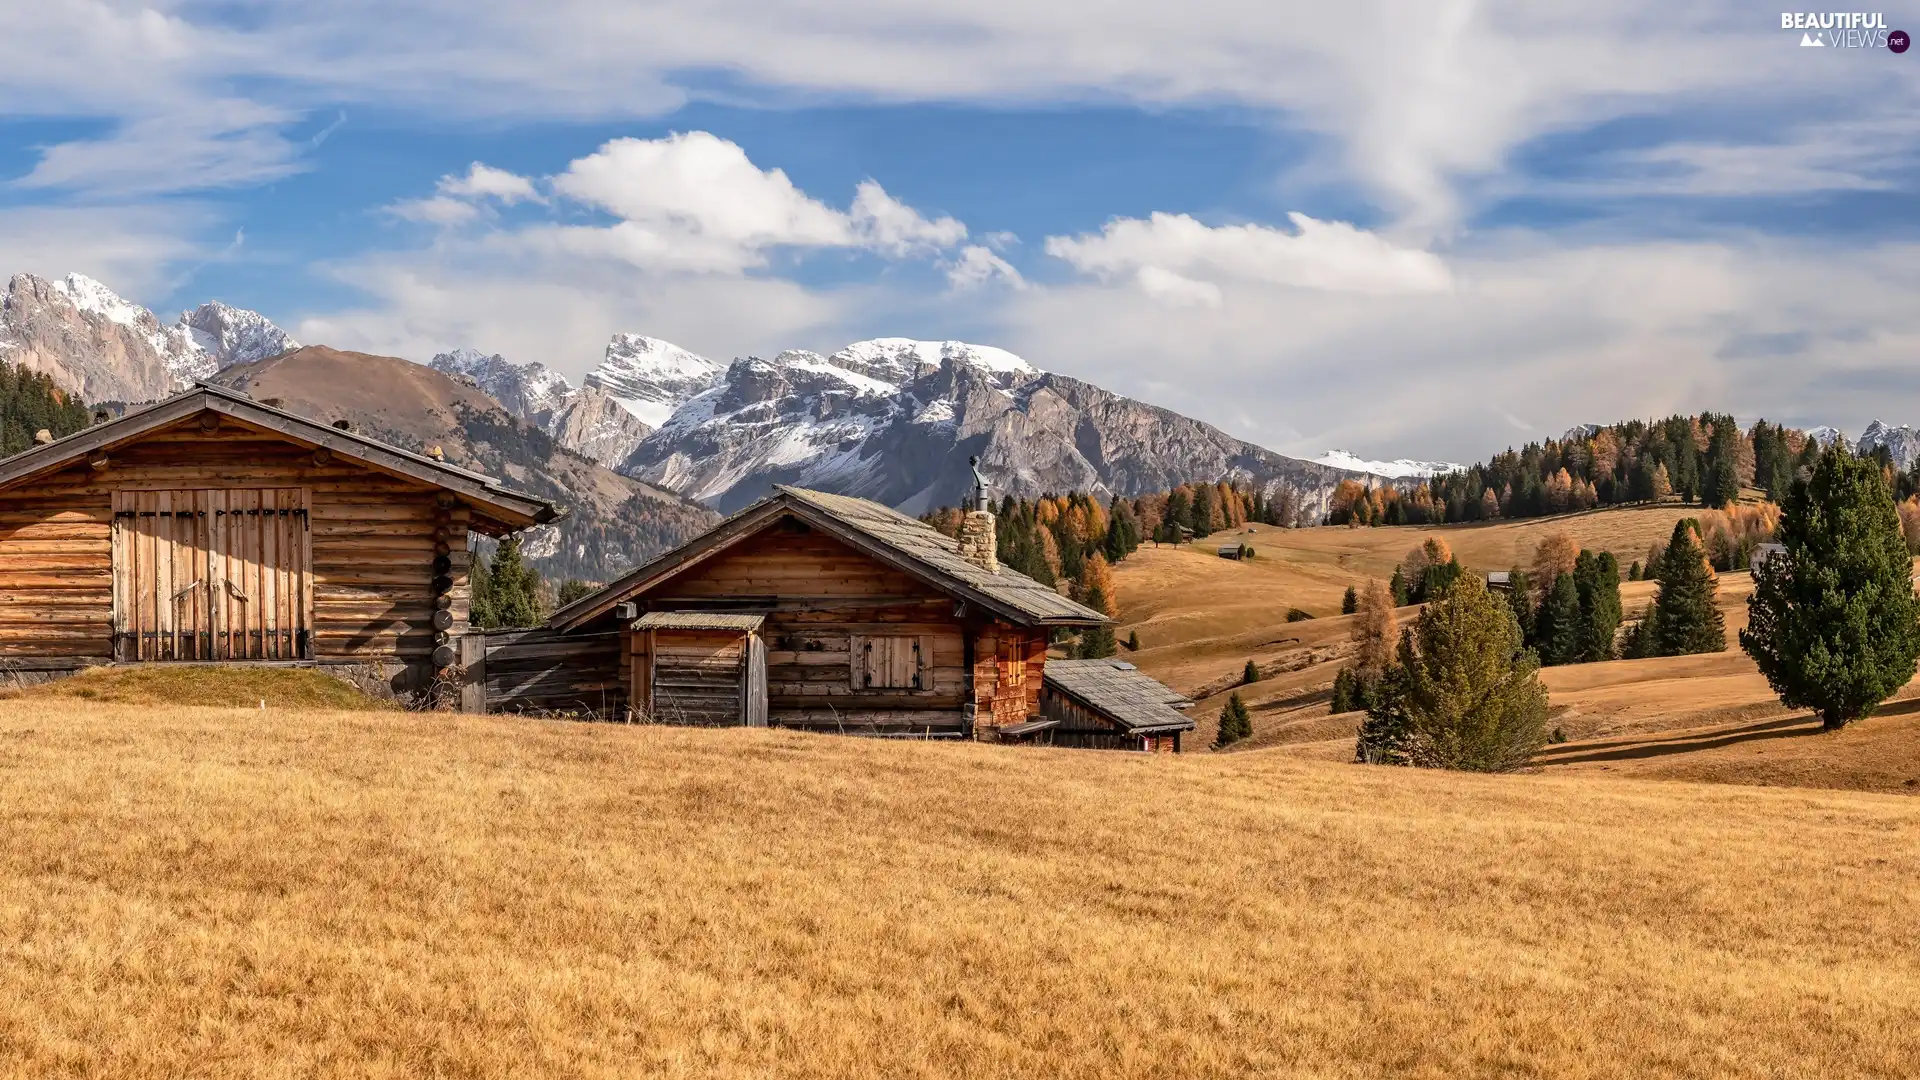 Dolomites, Seiser Alm Meadow, wood, The Hills, trees, Italy, clouds, Sassolungo Mountains, Val Gardena Valley, viewes, Houses